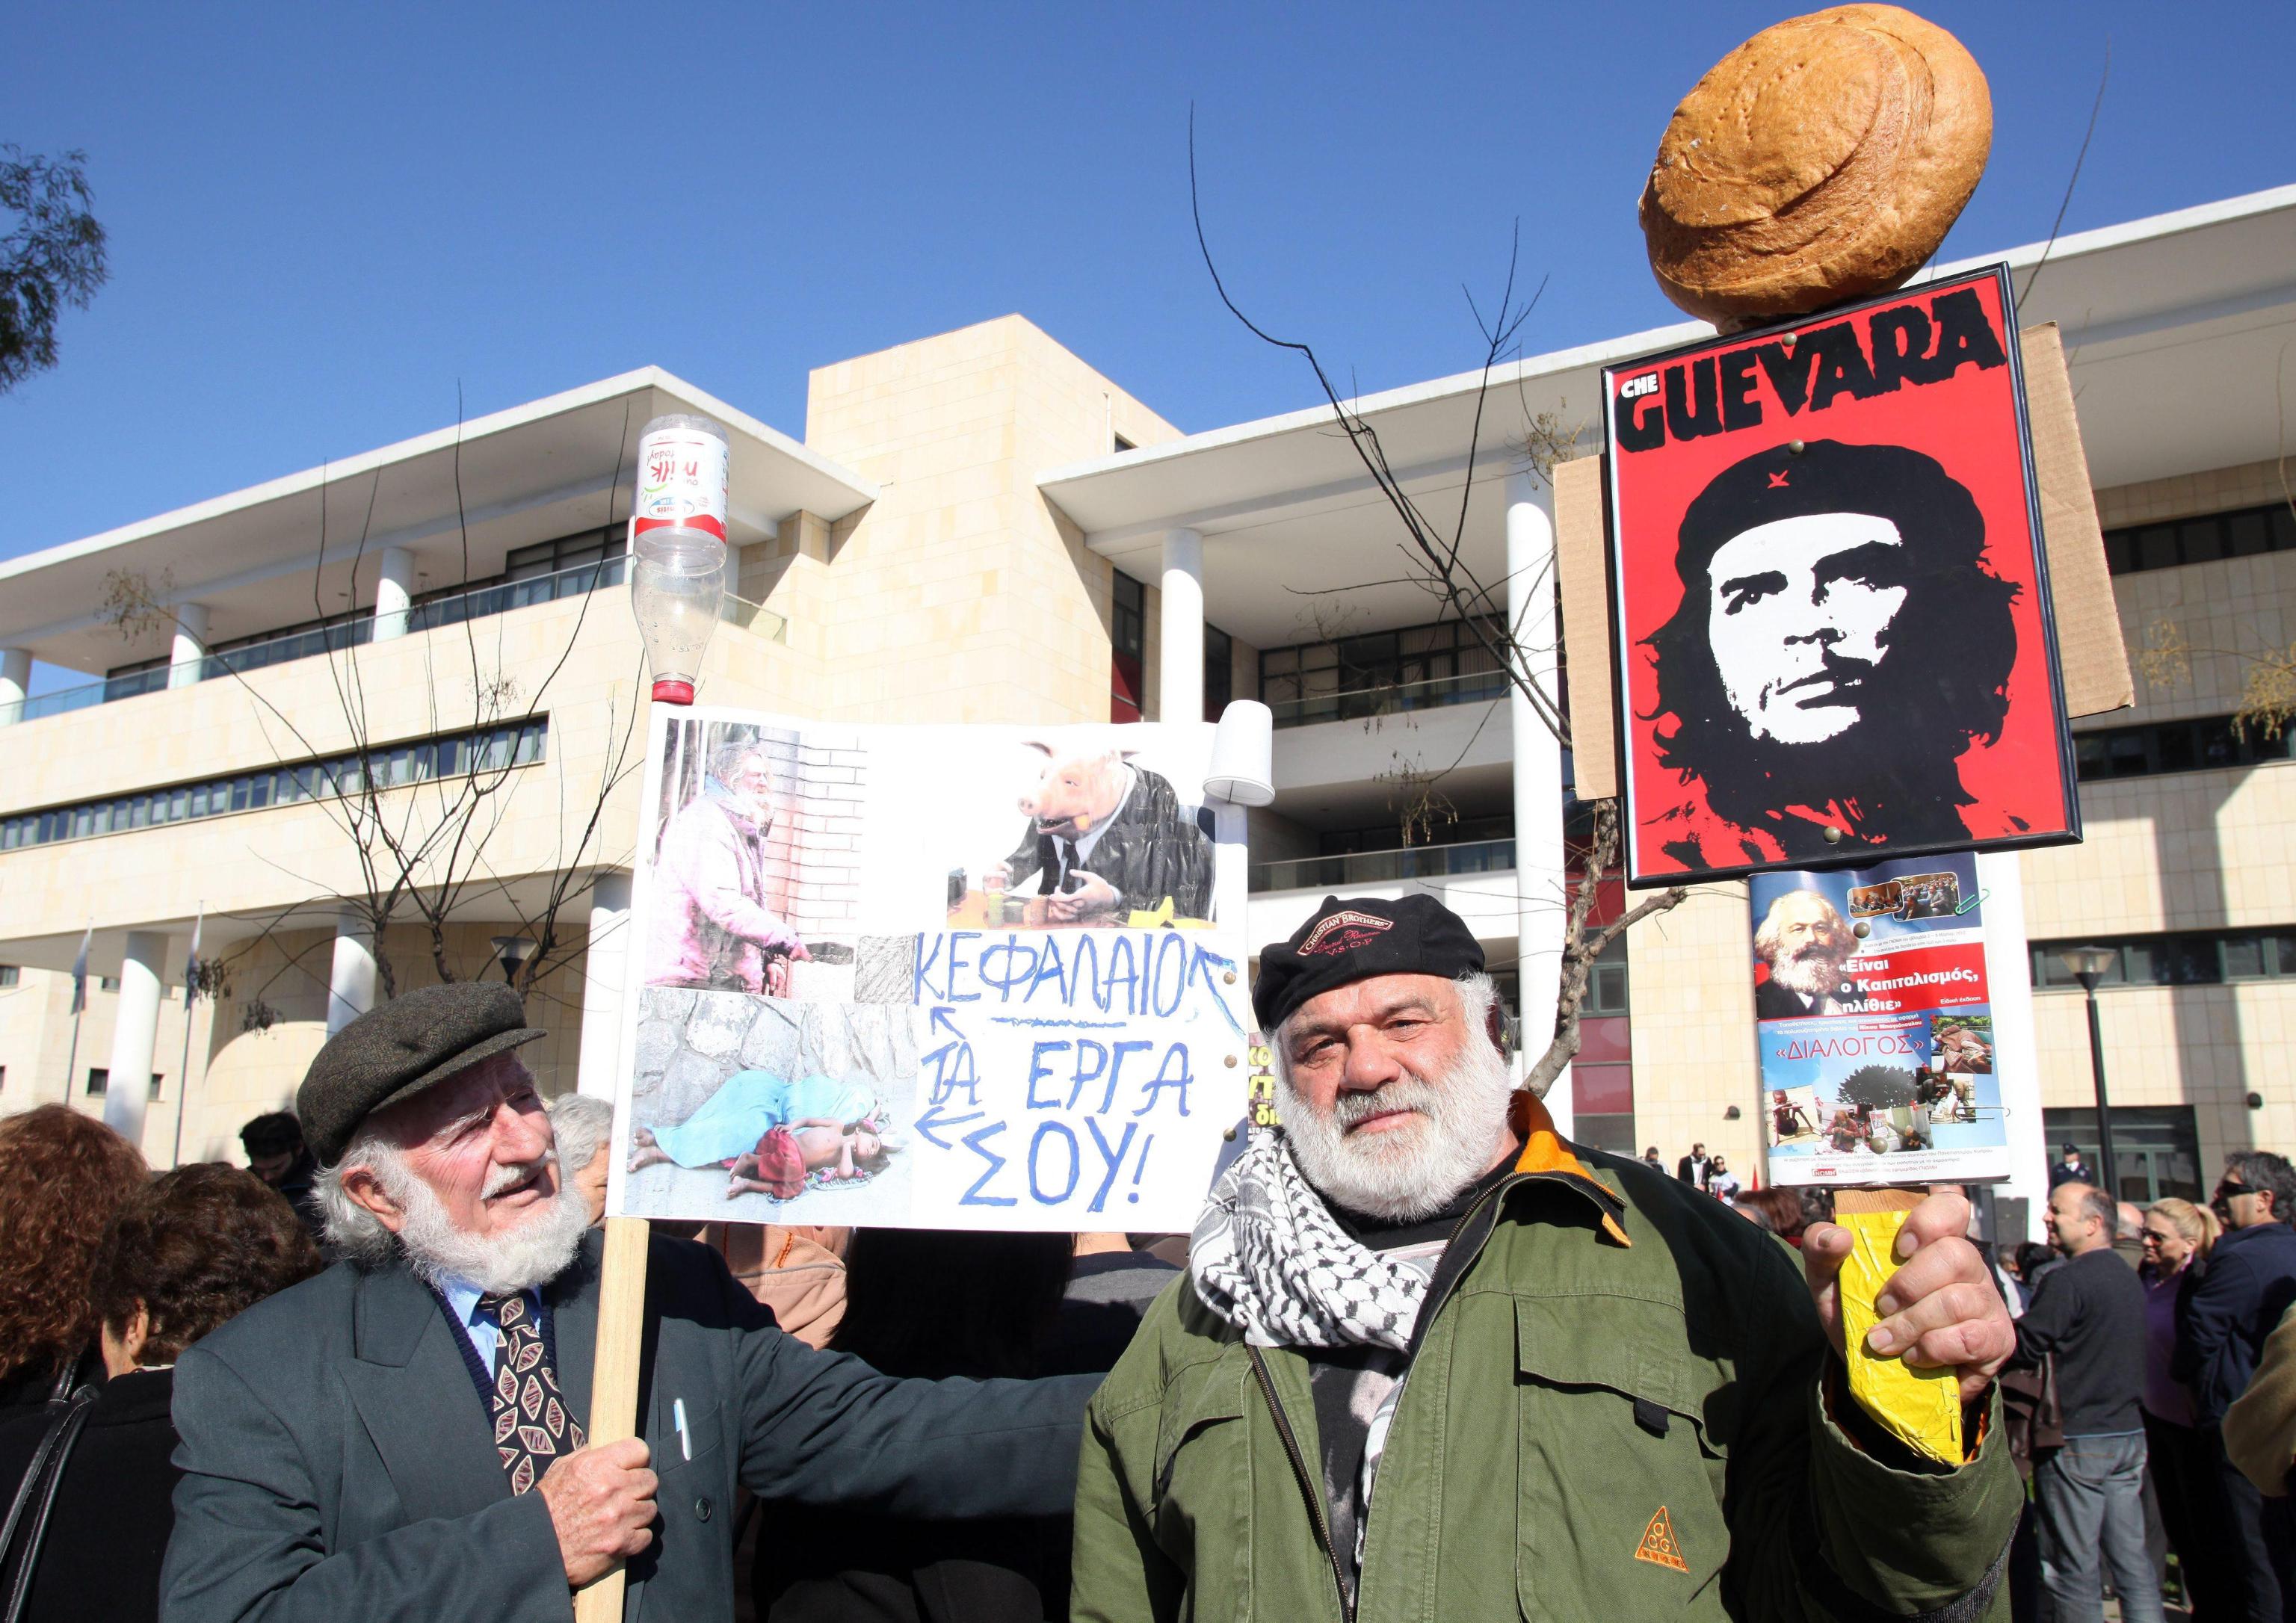 epa04061401 Protesters stand with placards, one reading 'Capital your deeds' (L) and the other showing a portrait of Argentinian Marxist revolutionary Che Guevara (R), during a demonstration outside the Ministry of Finance against the troika's austerity measures, in Nicosia, Cyprus, 08 February 2014. A protest against austerity measures imposed by the troika was held outside the Central Cooperation Bank as well as the Ministry of Finance.  EPA/KATIA CHRISTODOULOU